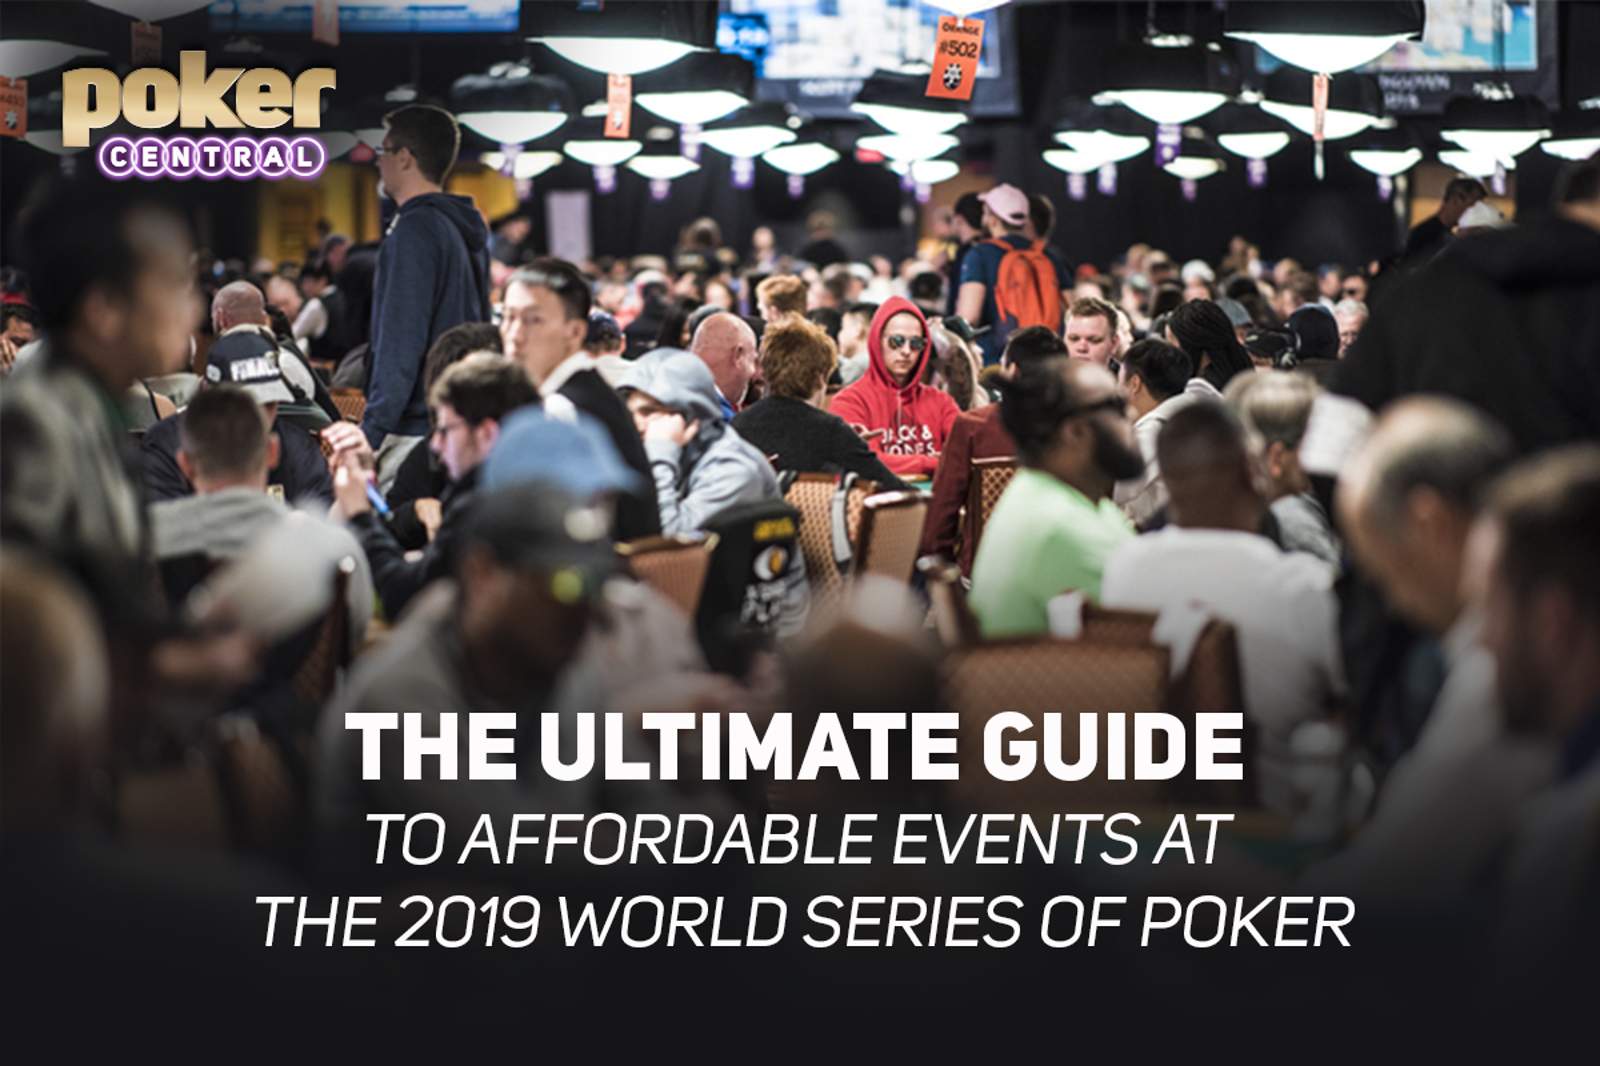 The Ultimate Guide to Affordable Events at the 2019 World Series of Poker